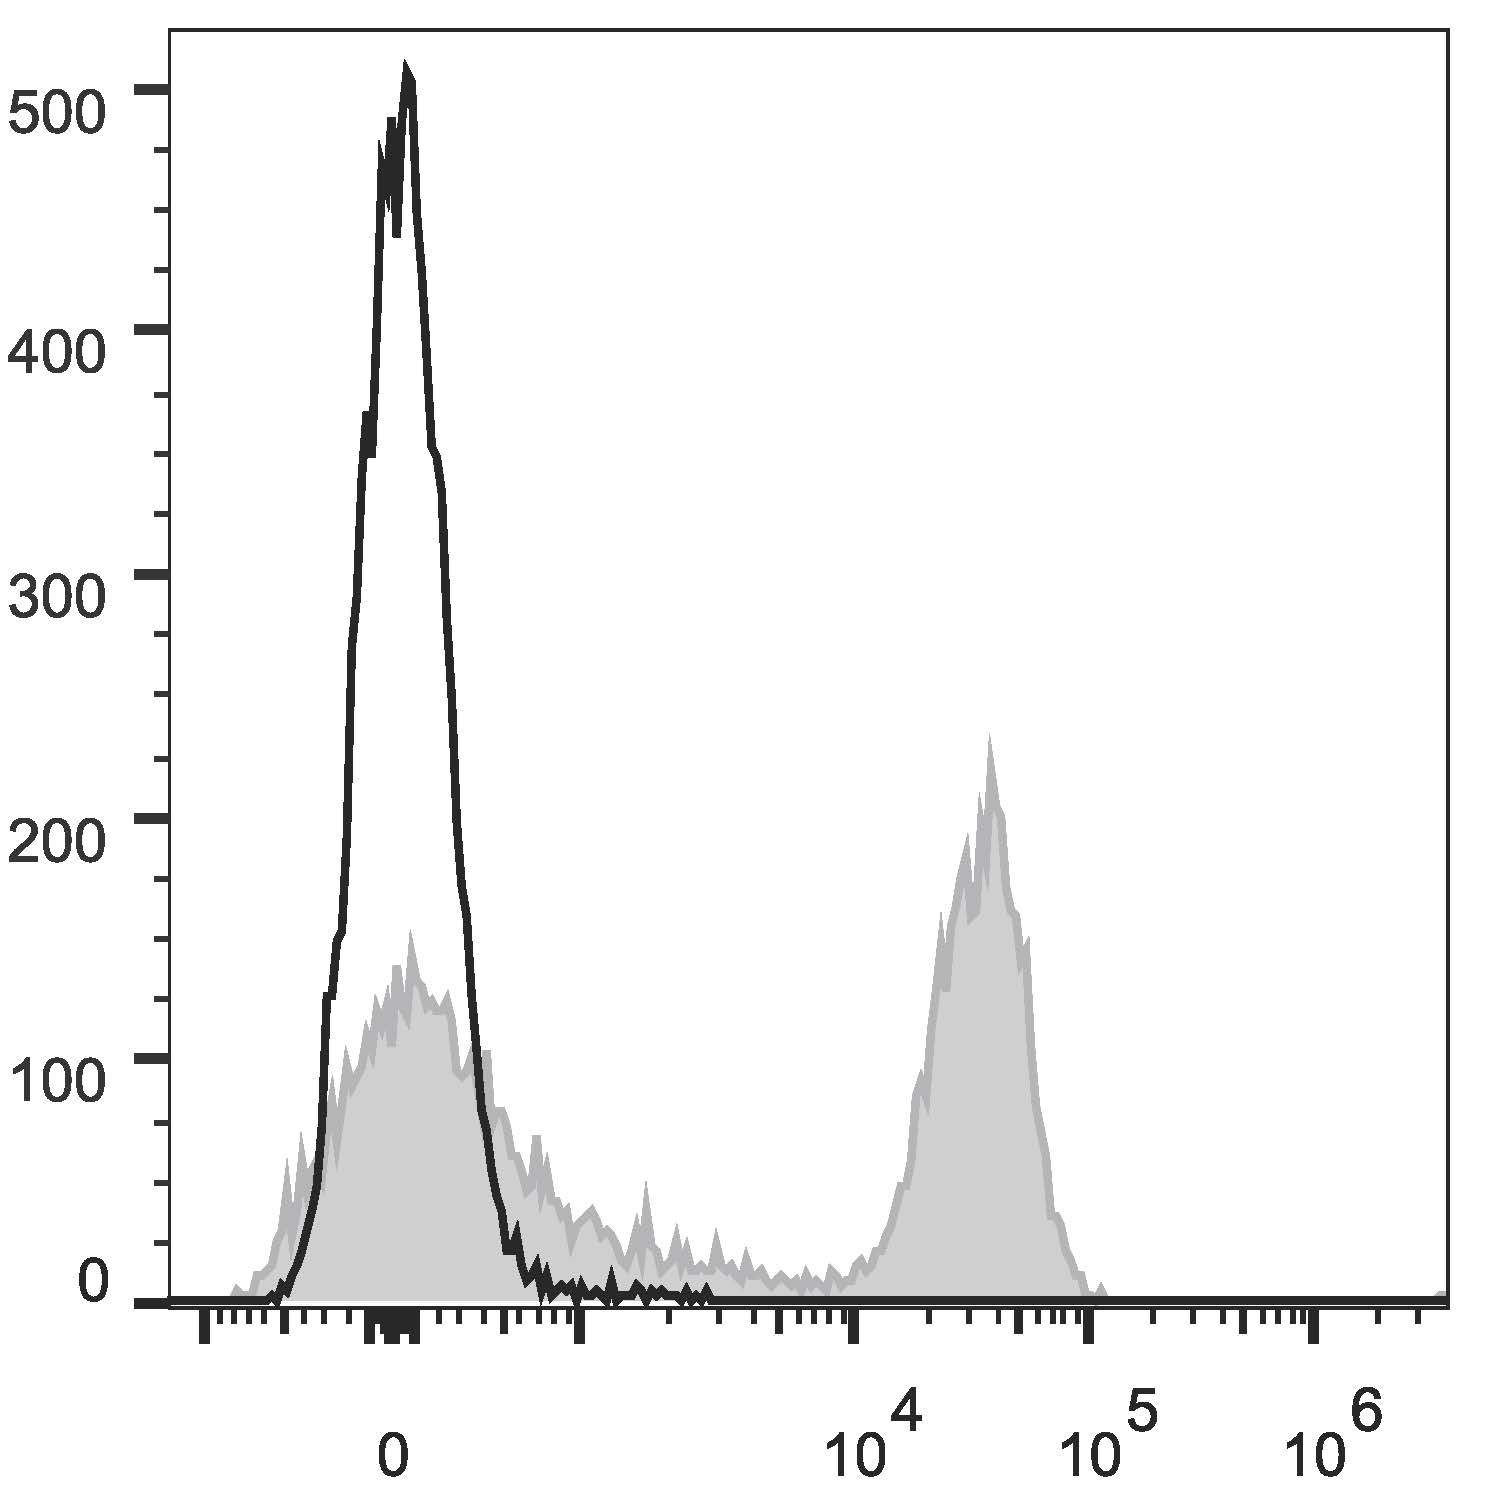 Rat splenocytes are  stained with Anti-Rat CD3 Monoclonal Antibody(APC Conjugated)[Used at 0.05 μg/10<sup>6</sup> cells dilution](filled gray histogram). Unstained splenocytes (empty black histogram) are used as control.